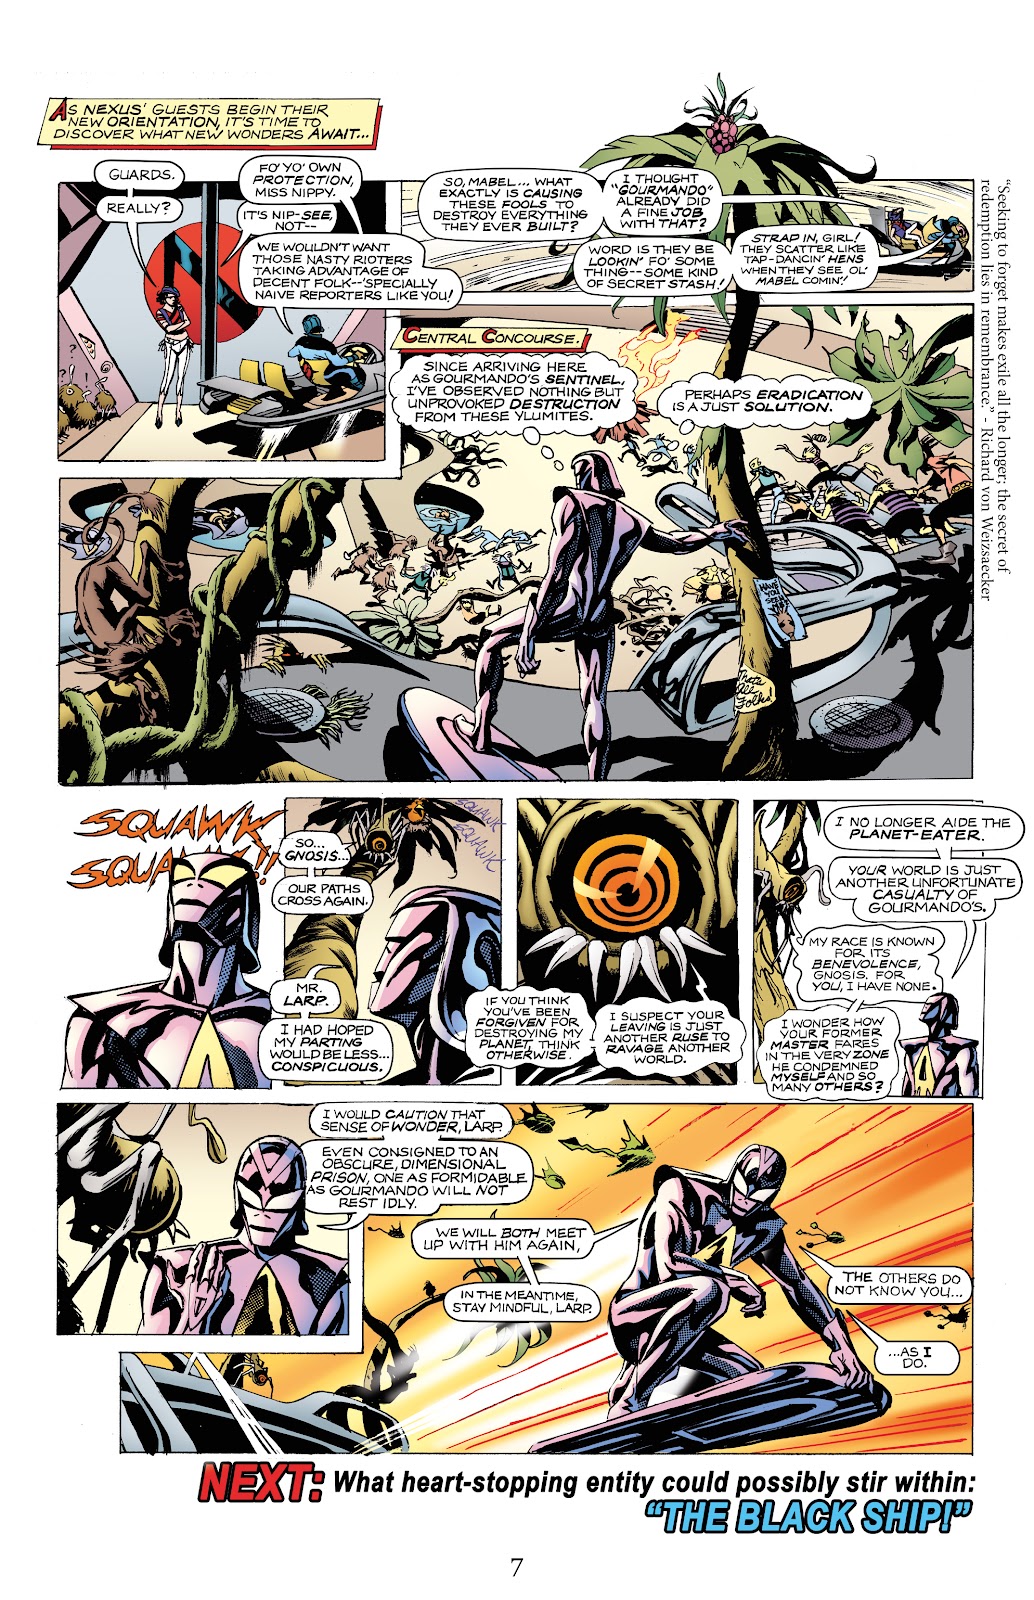 Nexus Newspaper Strips Vol 2: The Battle For Thuneworld issue 1 - Page 9